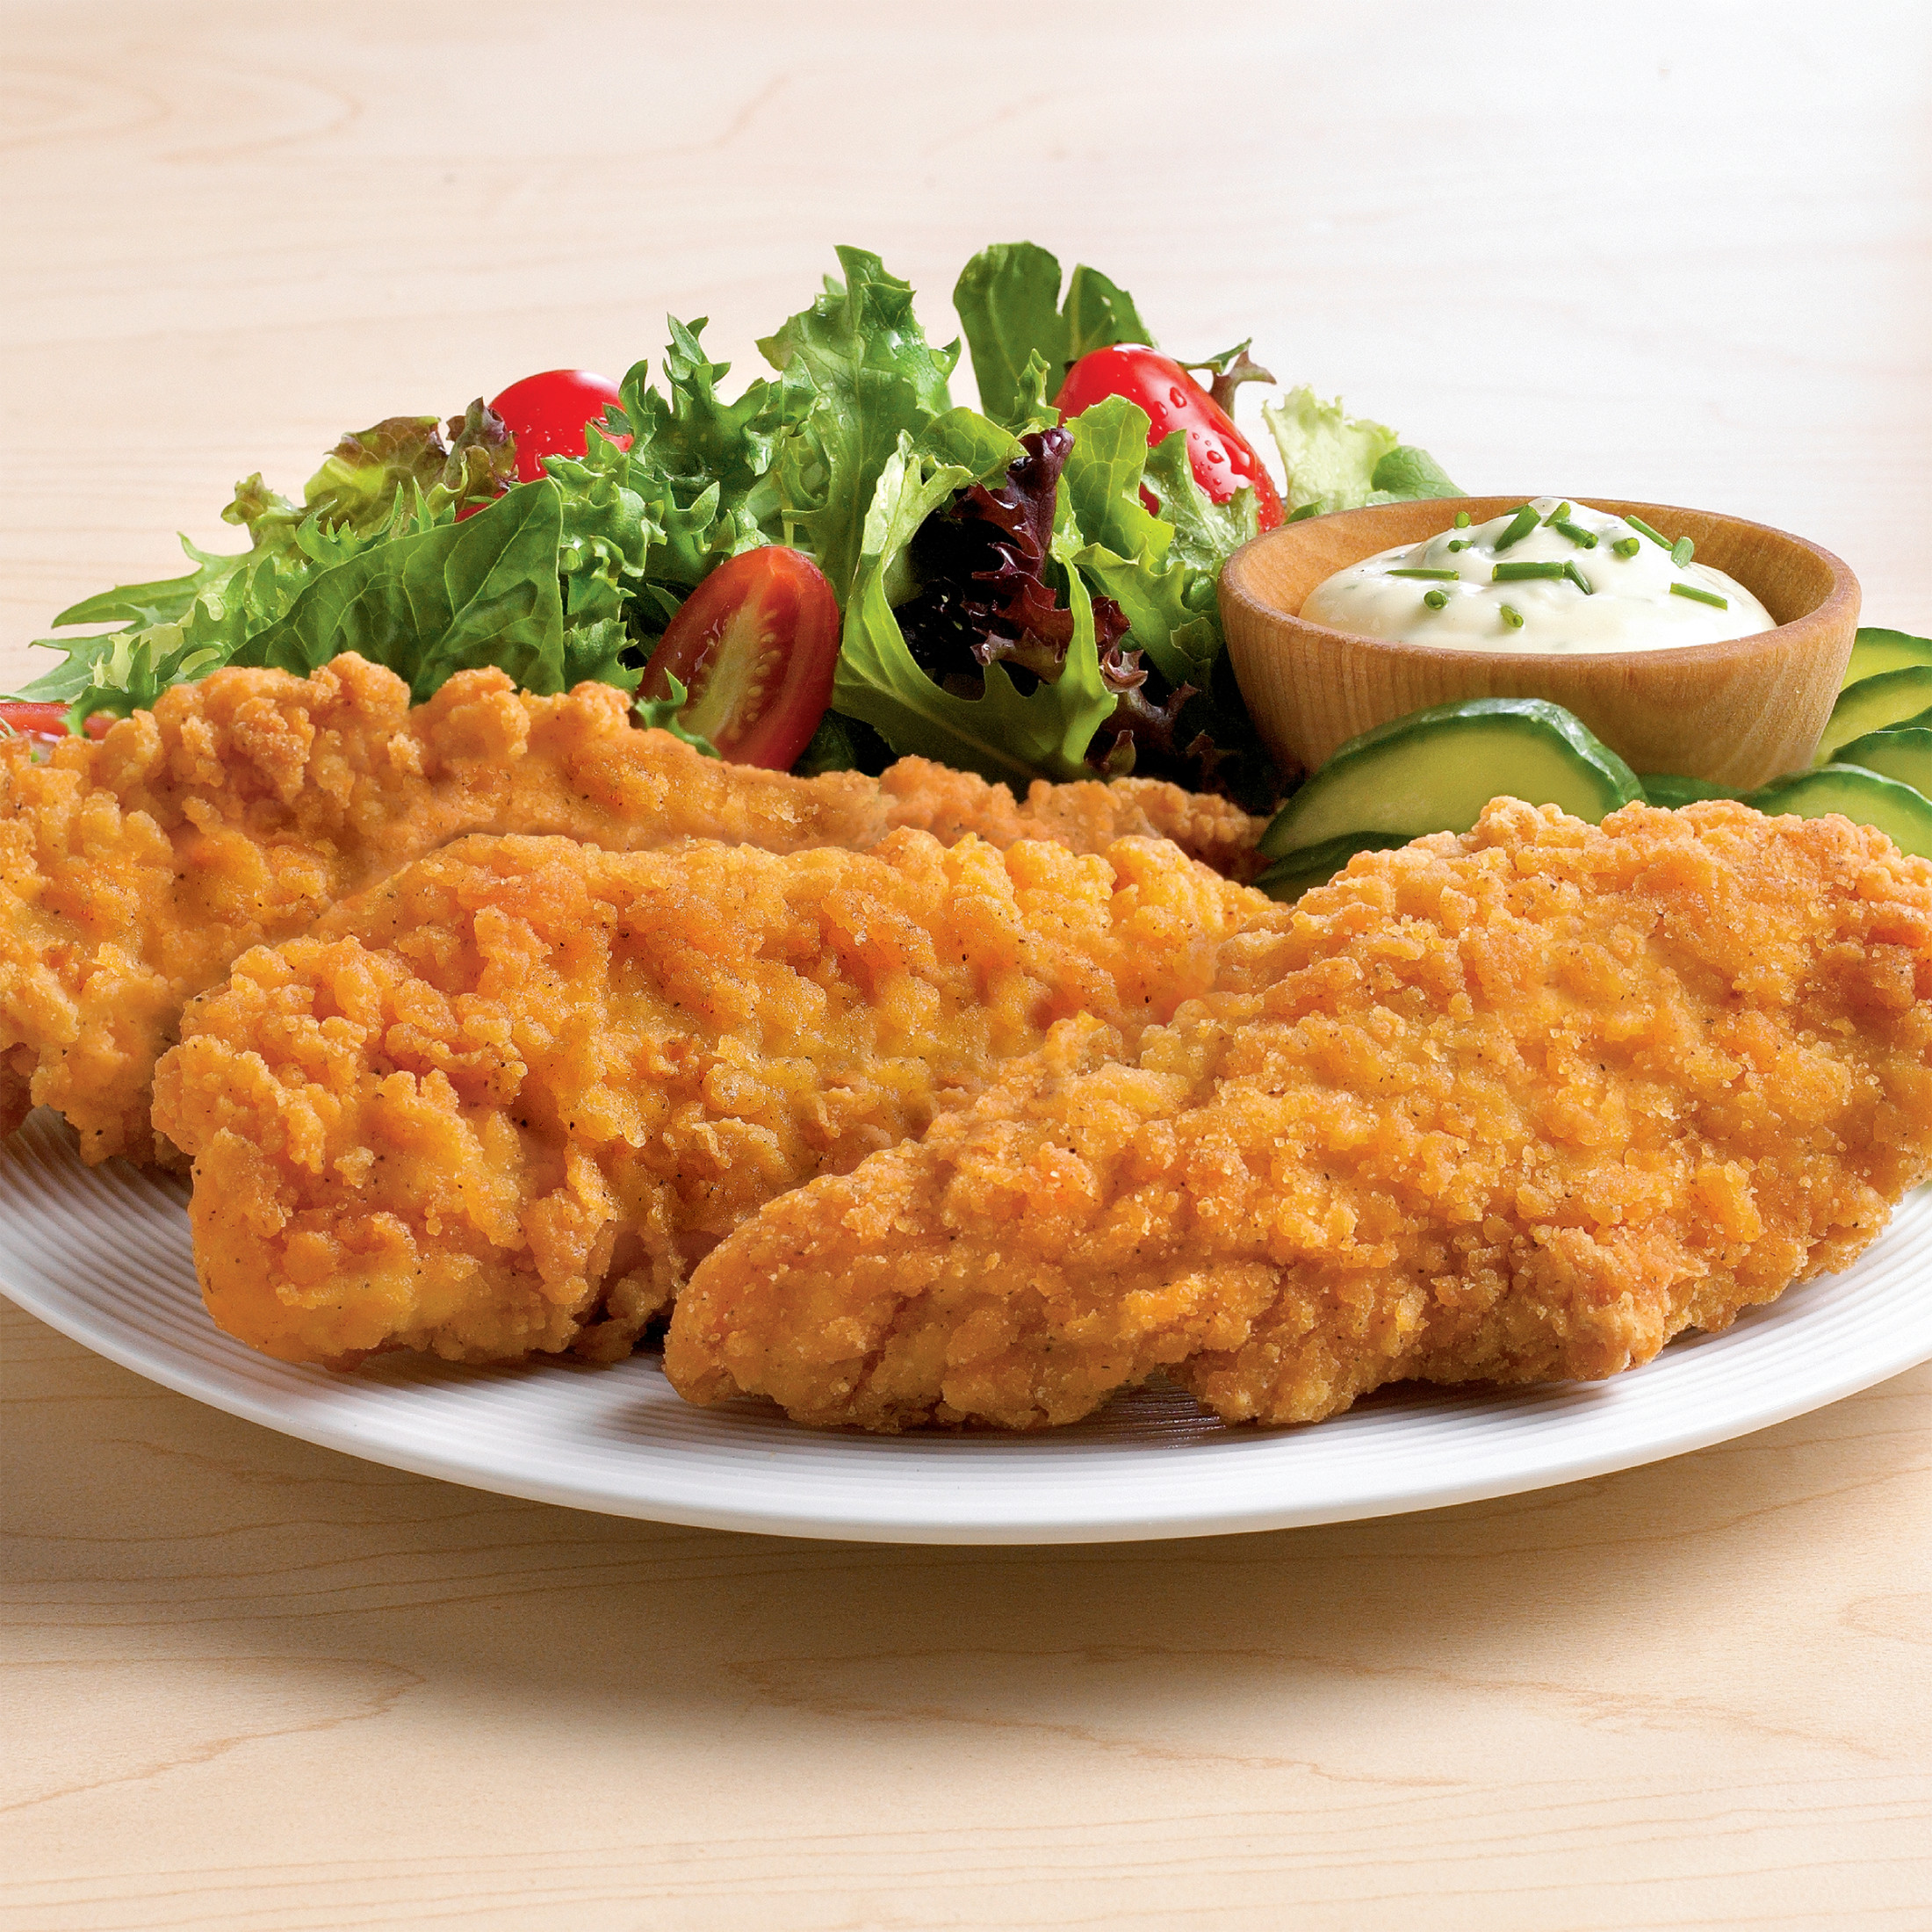 Great Value Fully Cooked Chicken Strips, 25 oz (Frozen) - image 5 of 11